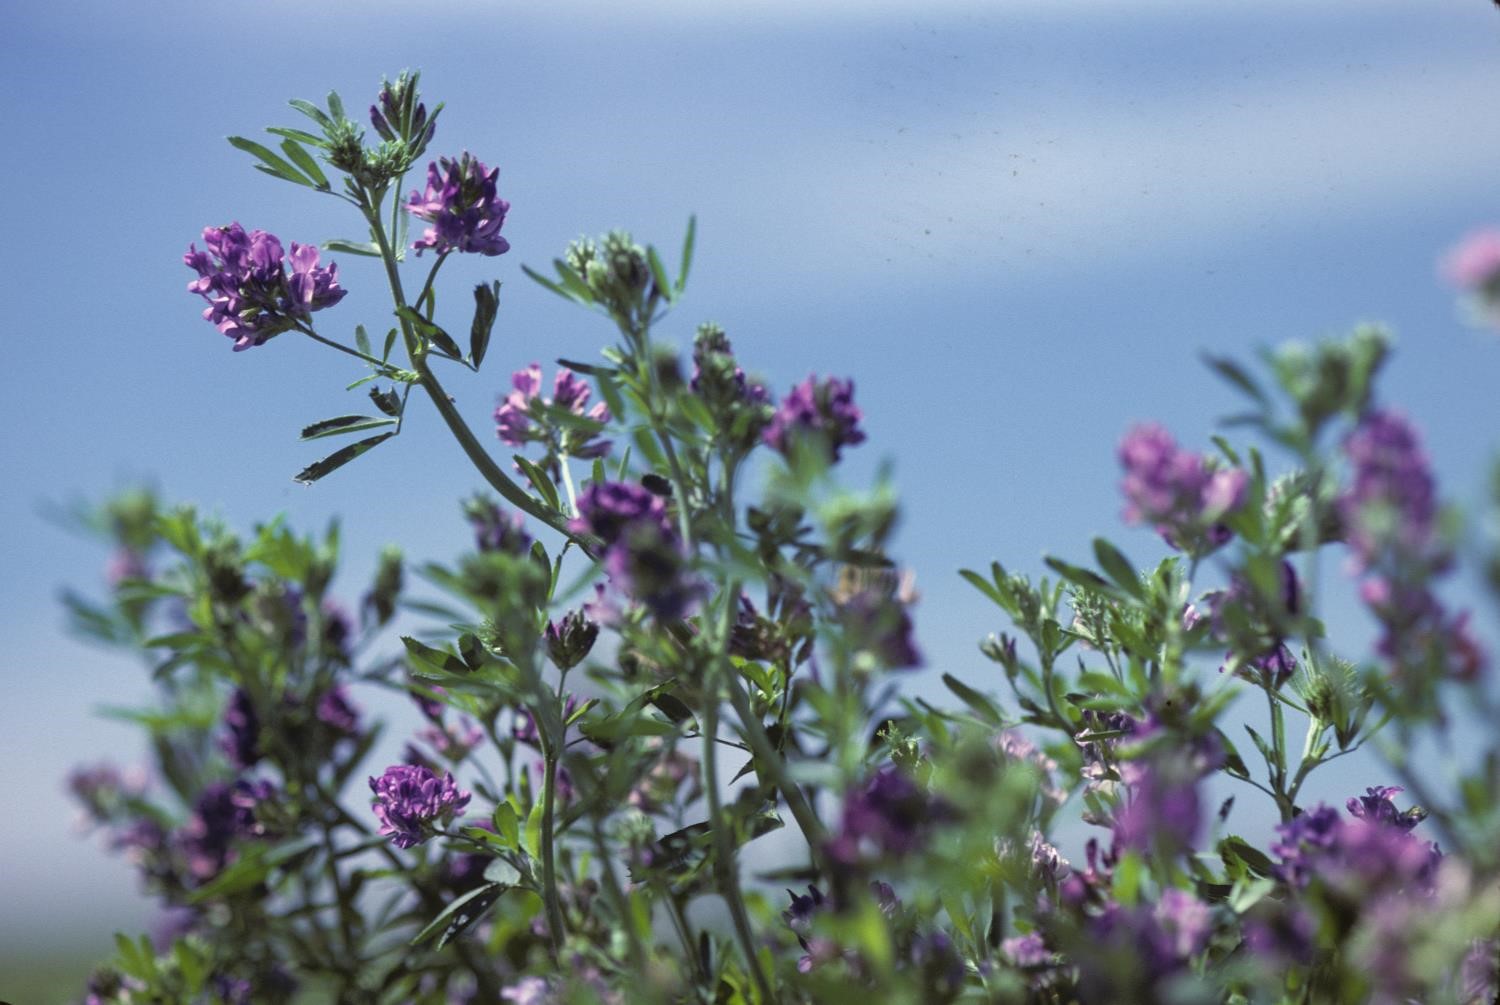 alfalfa plant with flowers in a field